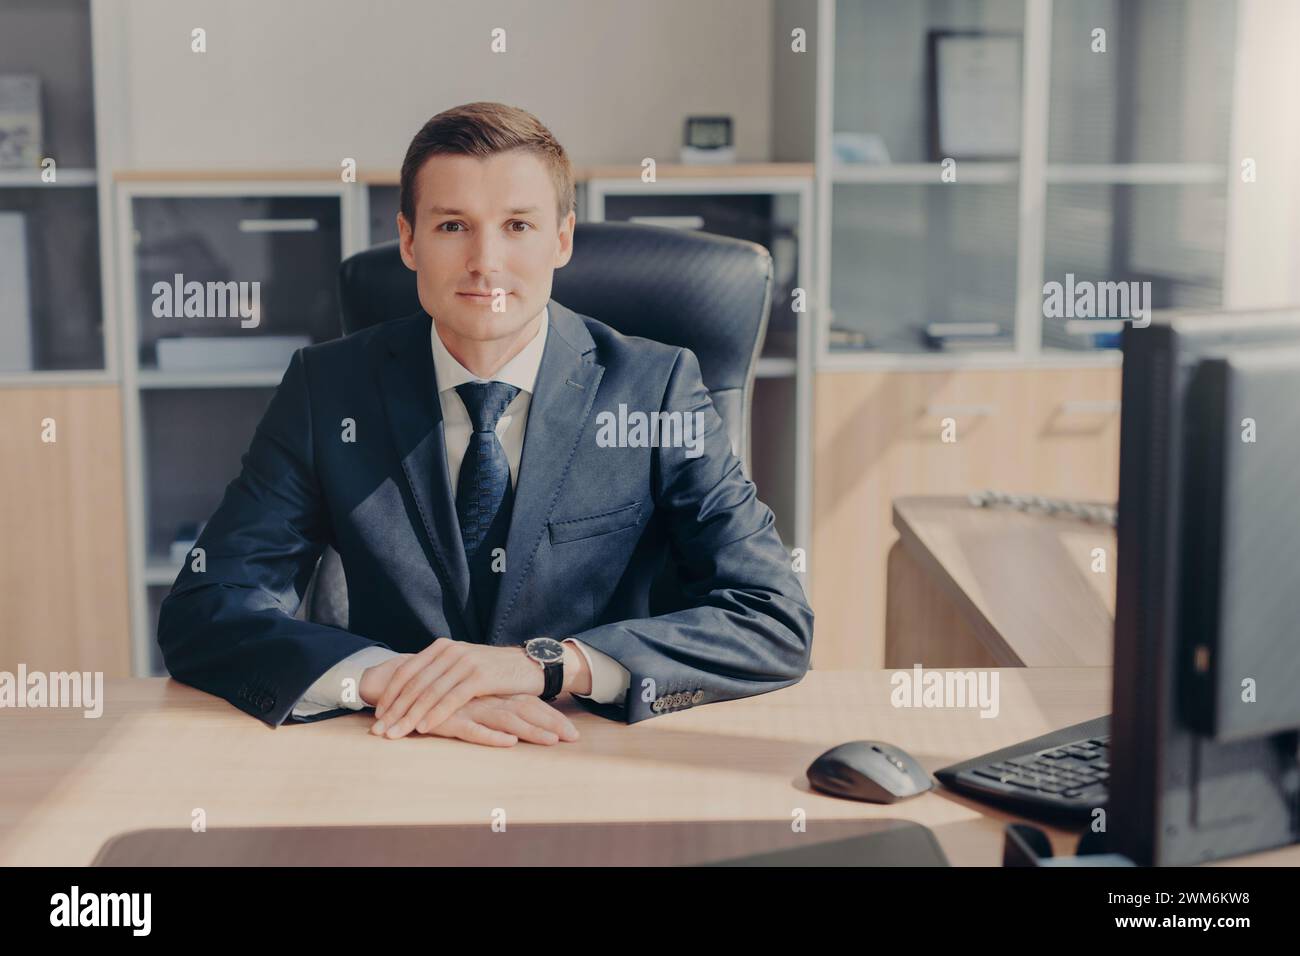 Poised executive sitting assertively at his desk in a well-lit professional workspace. Stock Photo